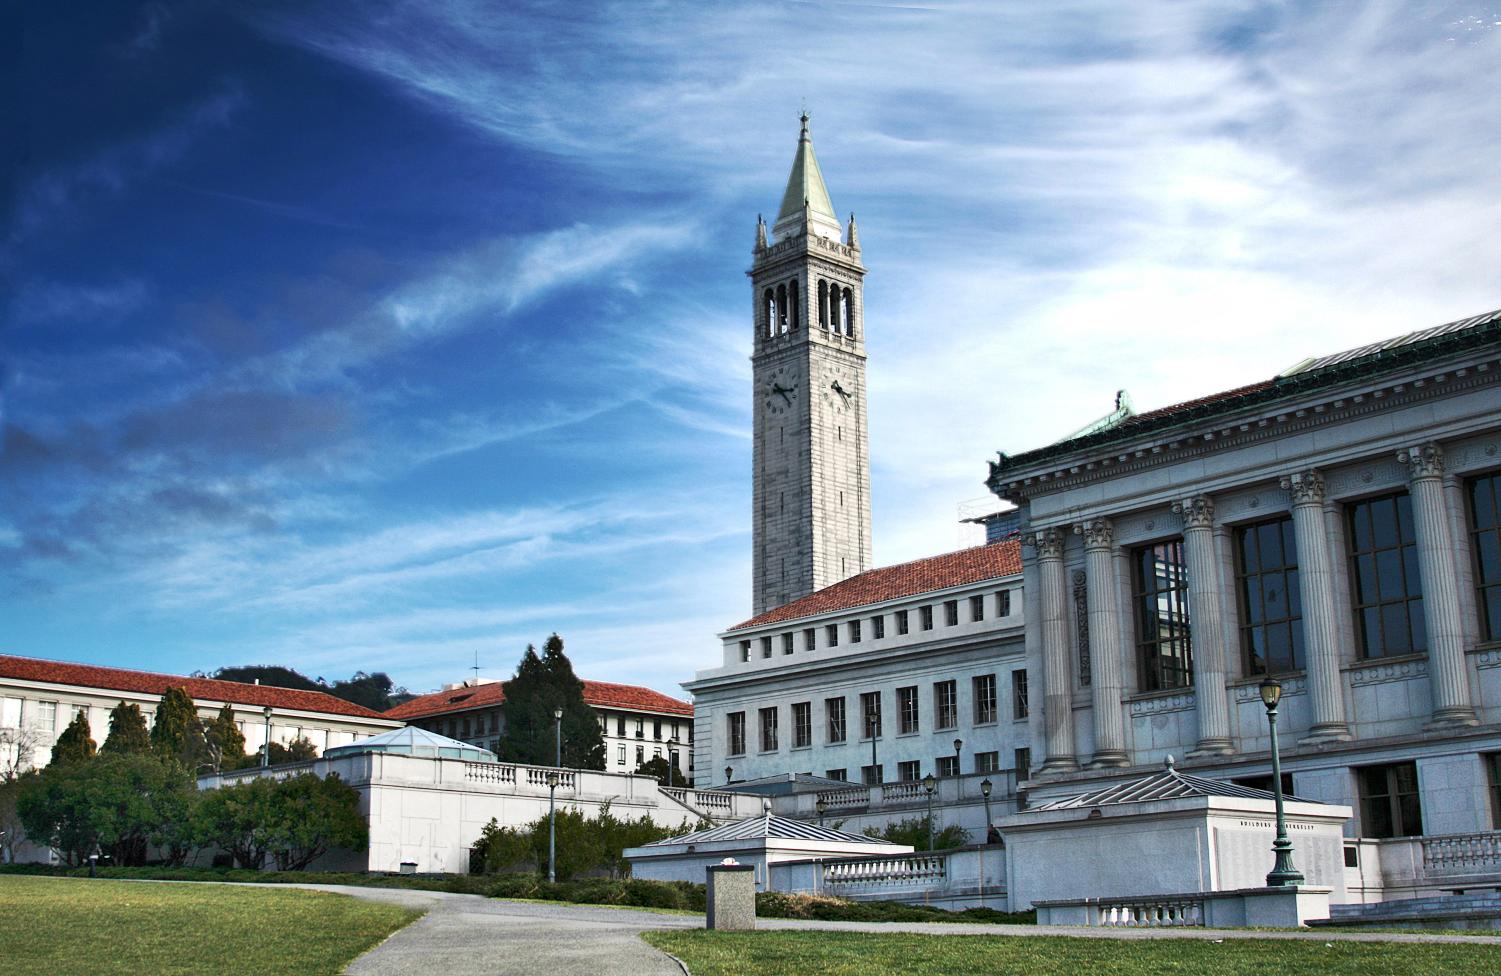 After the California legislature passed SB 118 on March 14, UC Berkeley will now be able to expand its incoming class of 2026 by 3,050 students.